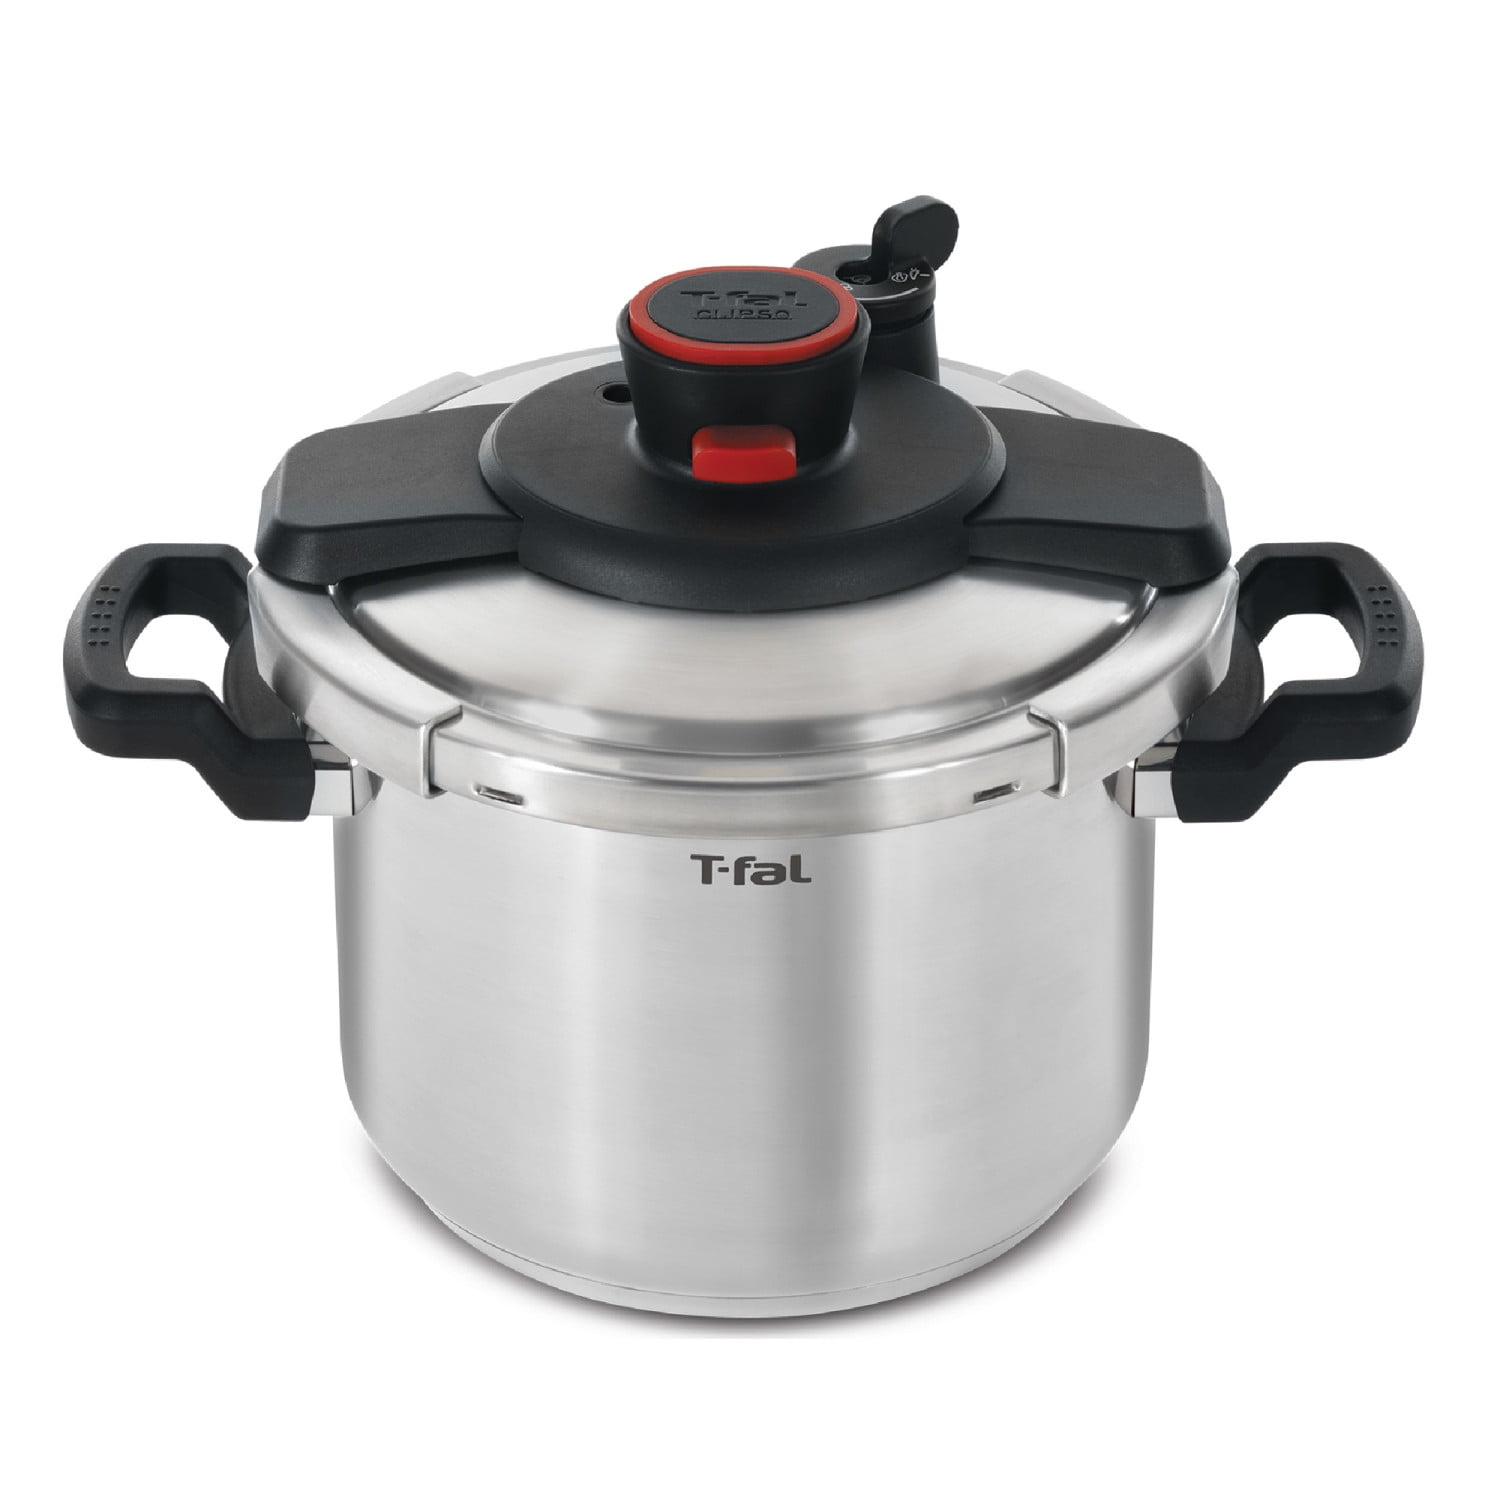 T-fal Stainless Steel Precision Review